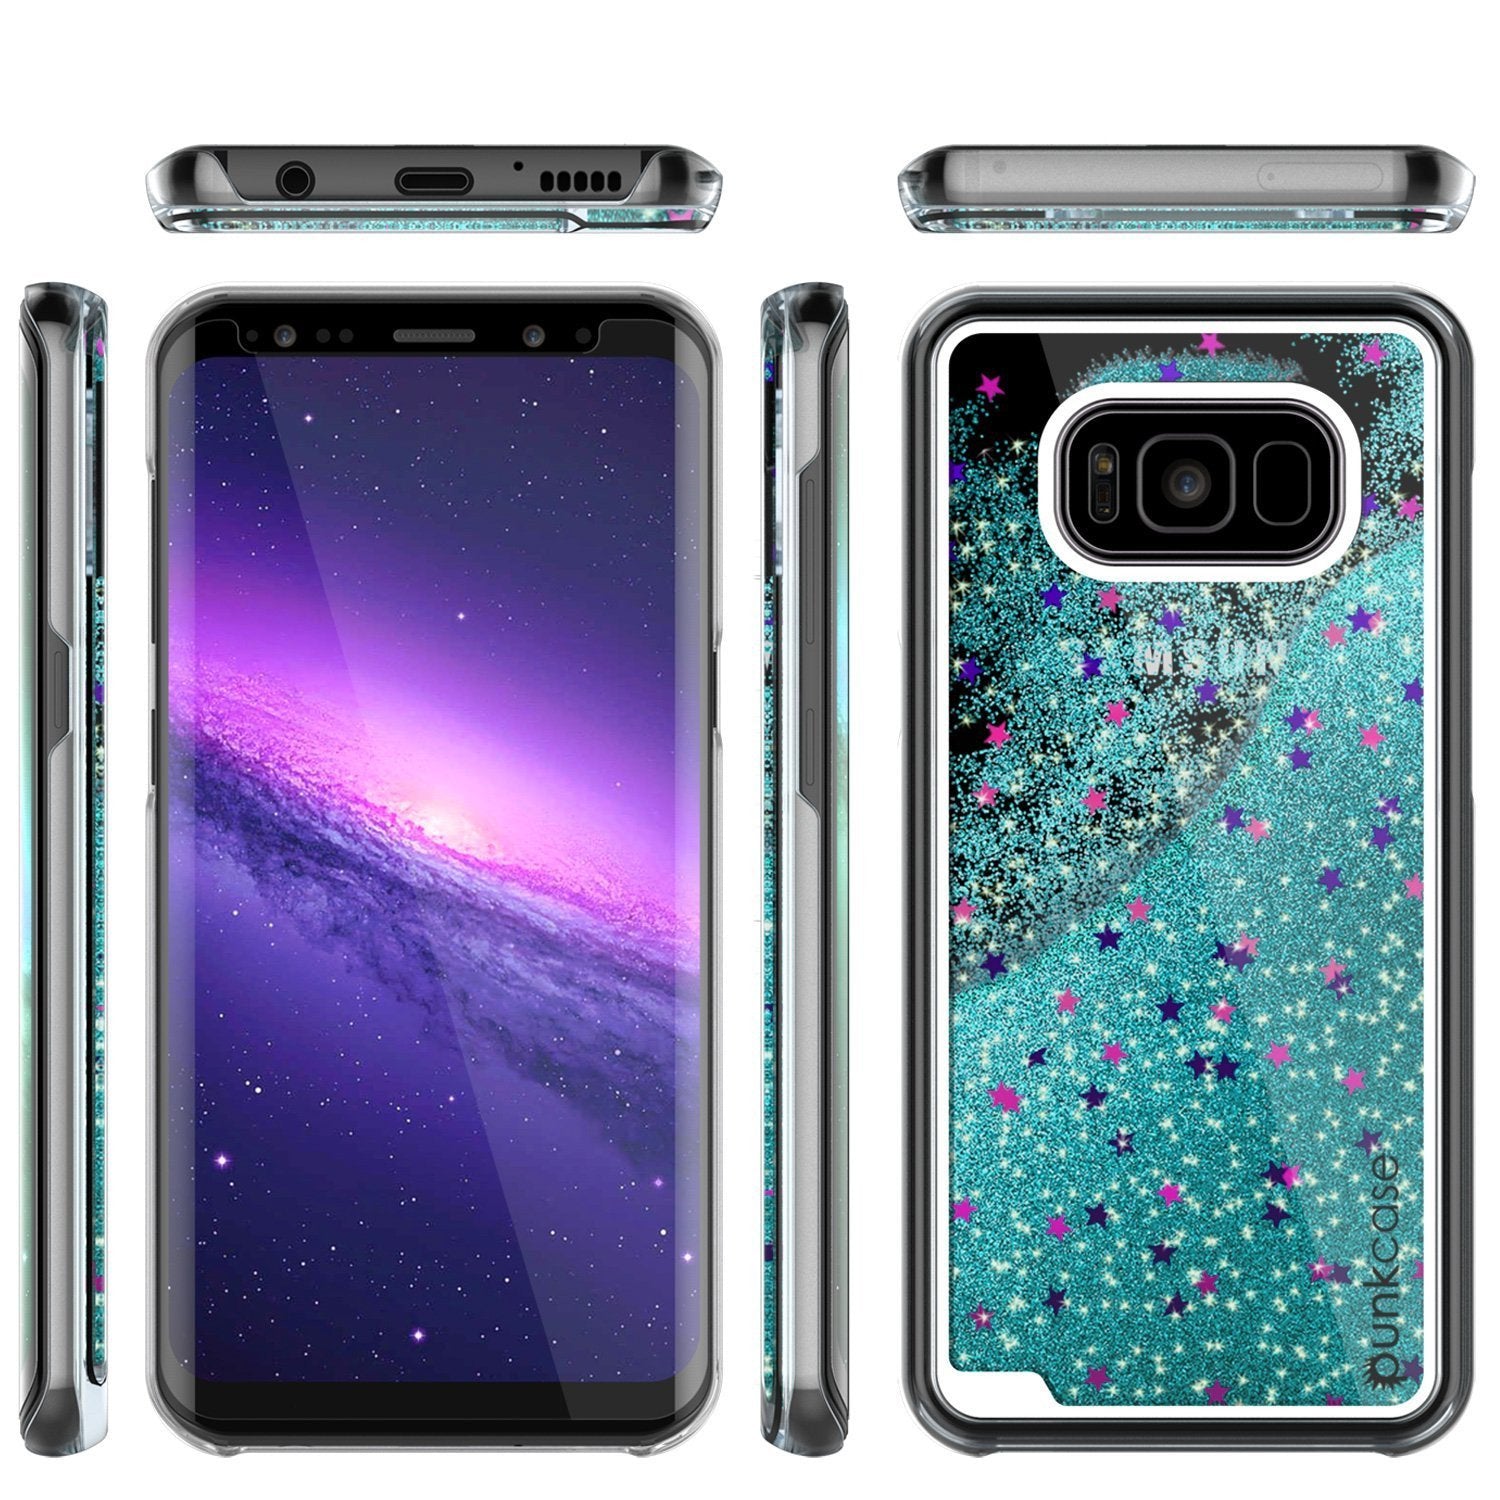 Galaxy S8 Plus Dual-Layer Screen Protective Glitter Case [Teal]